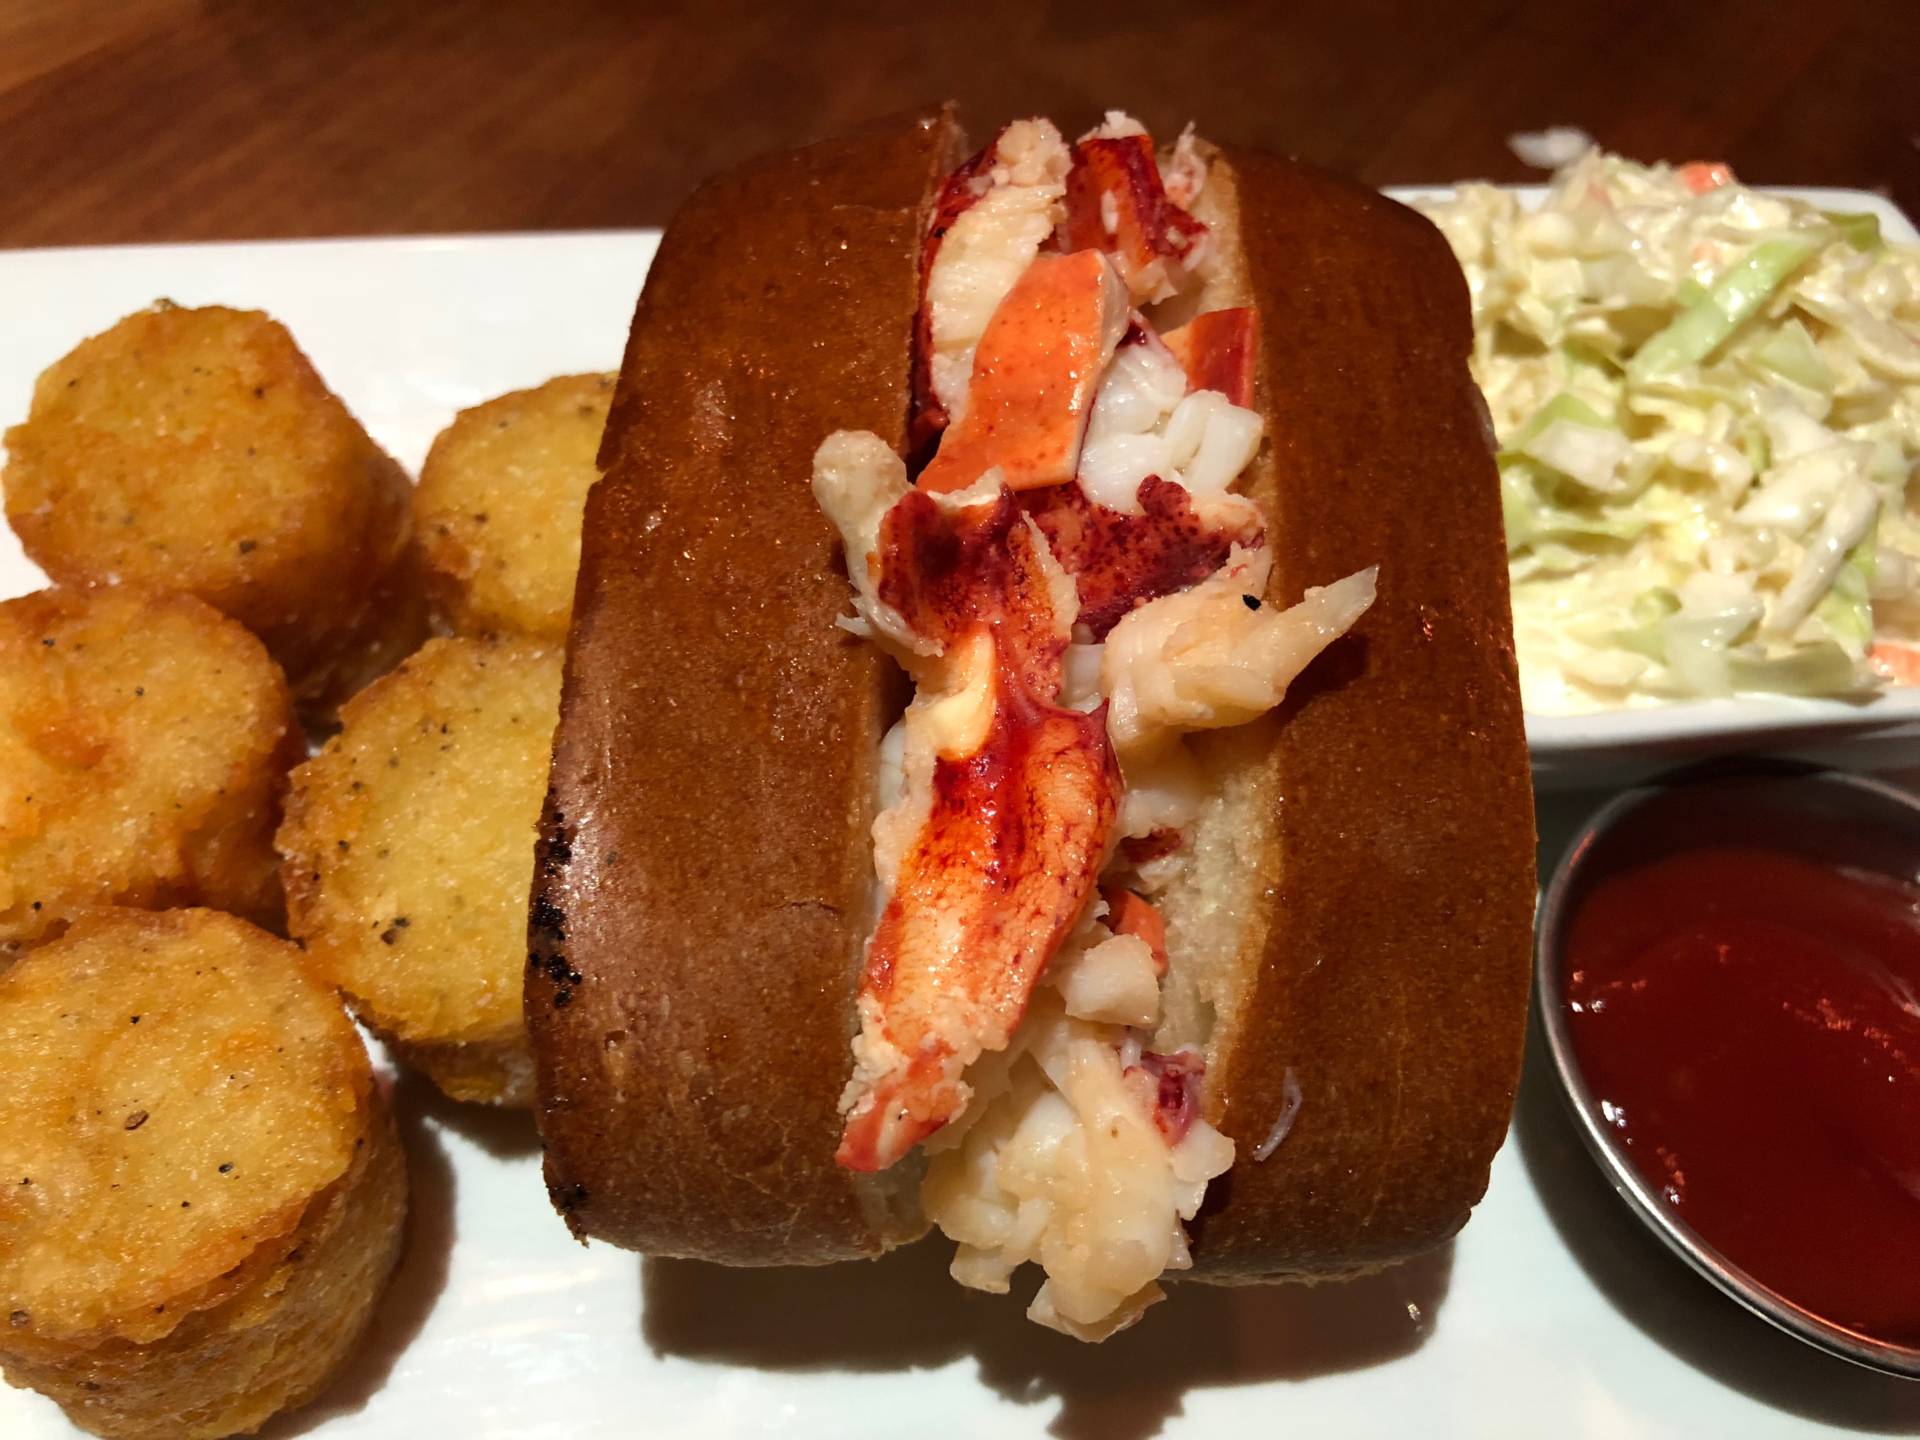 Butter-based lobster roll at Anchor & Hope